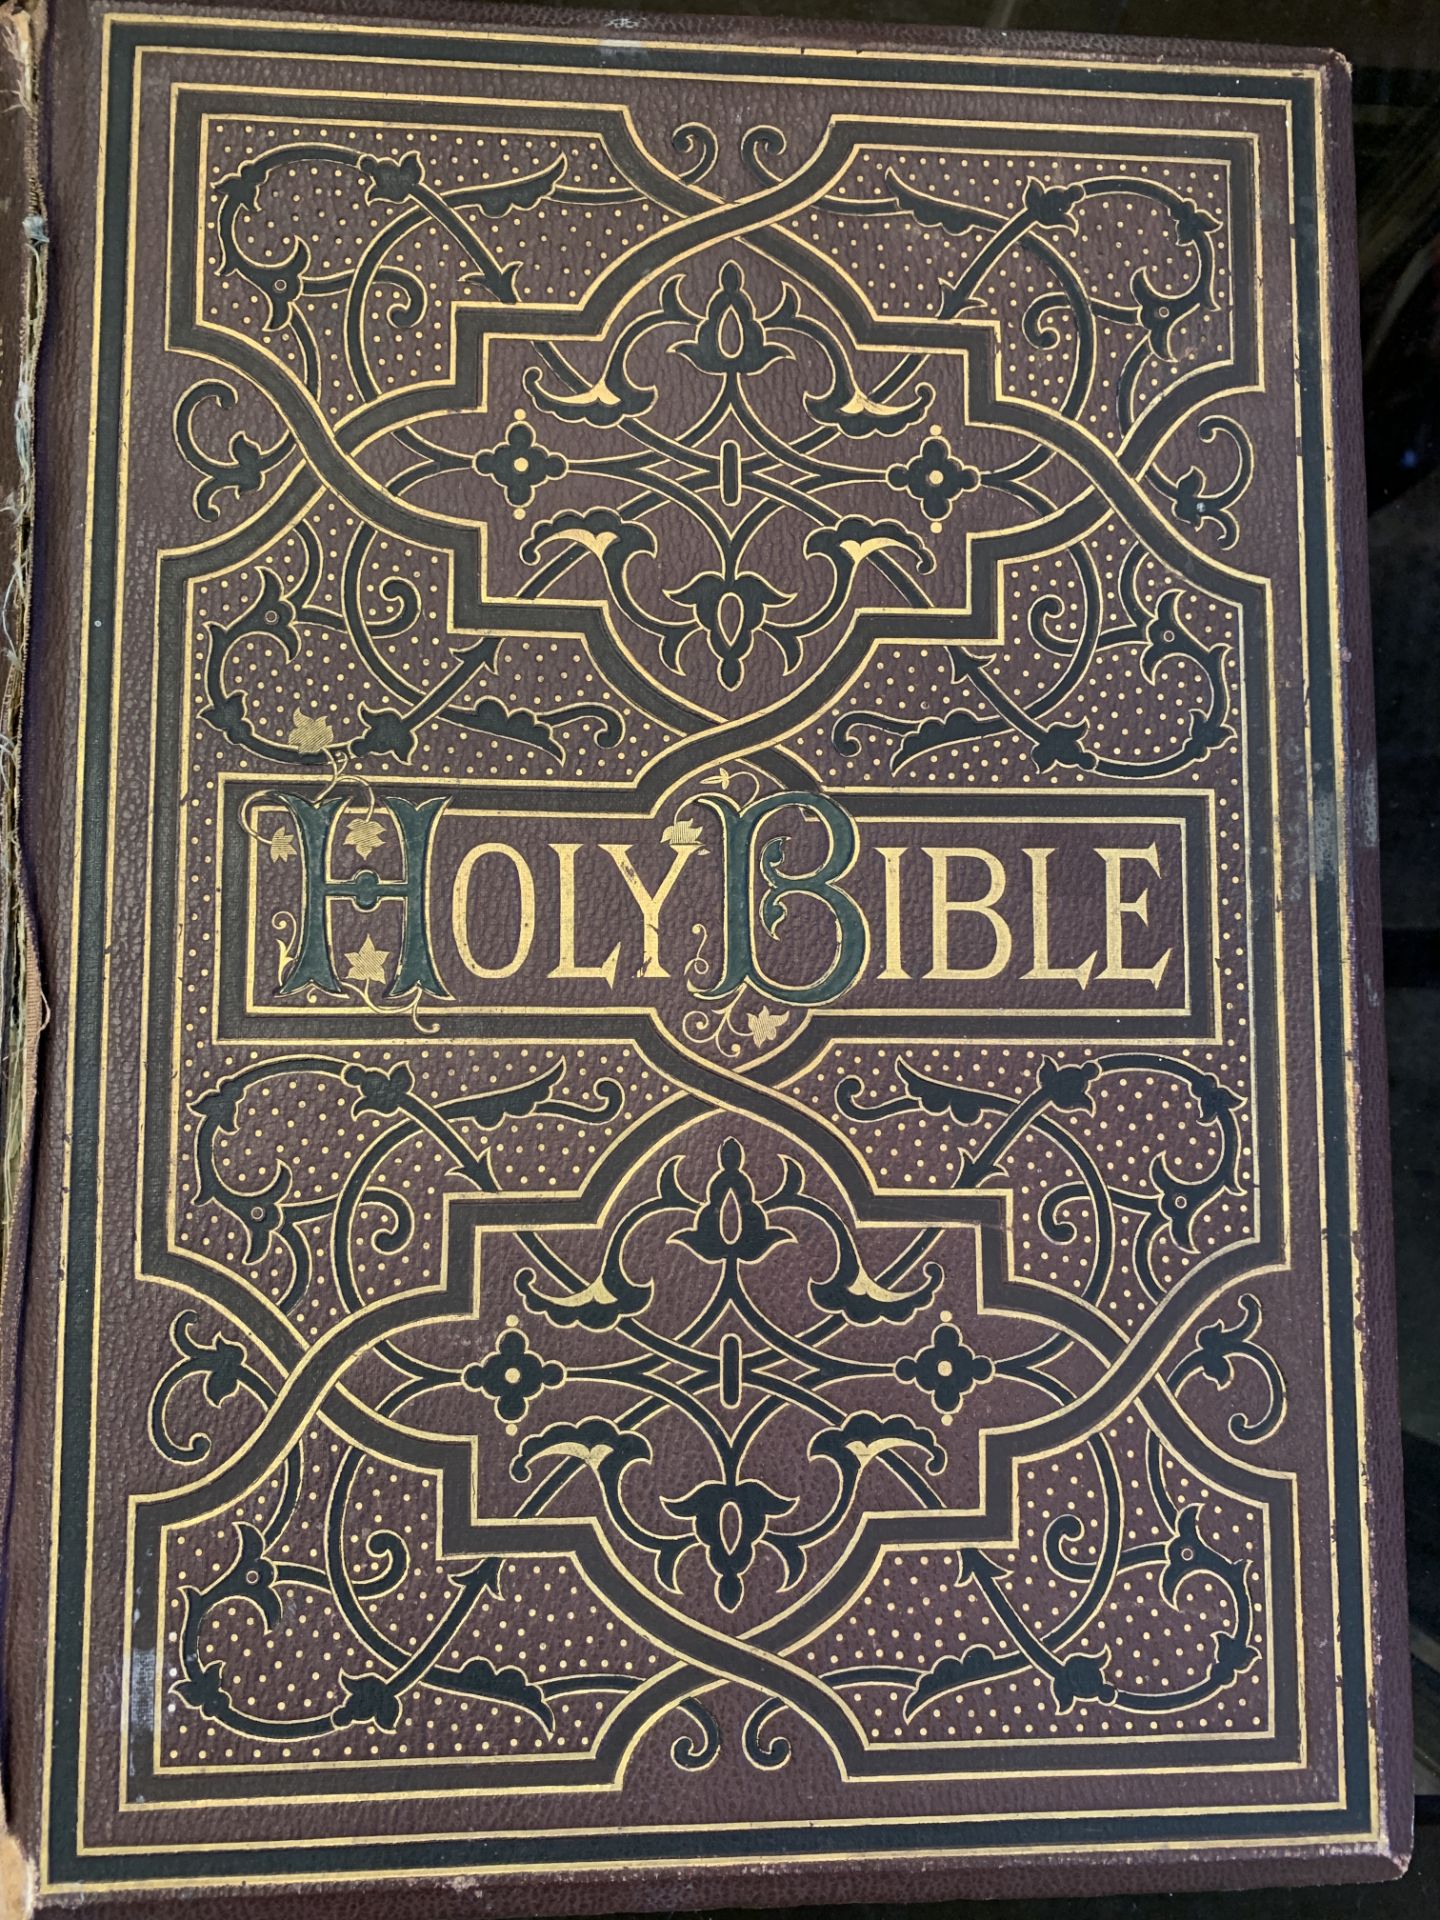 Illustrated Family Bible and the Old Testament illustrated by J James Tissot, 1904